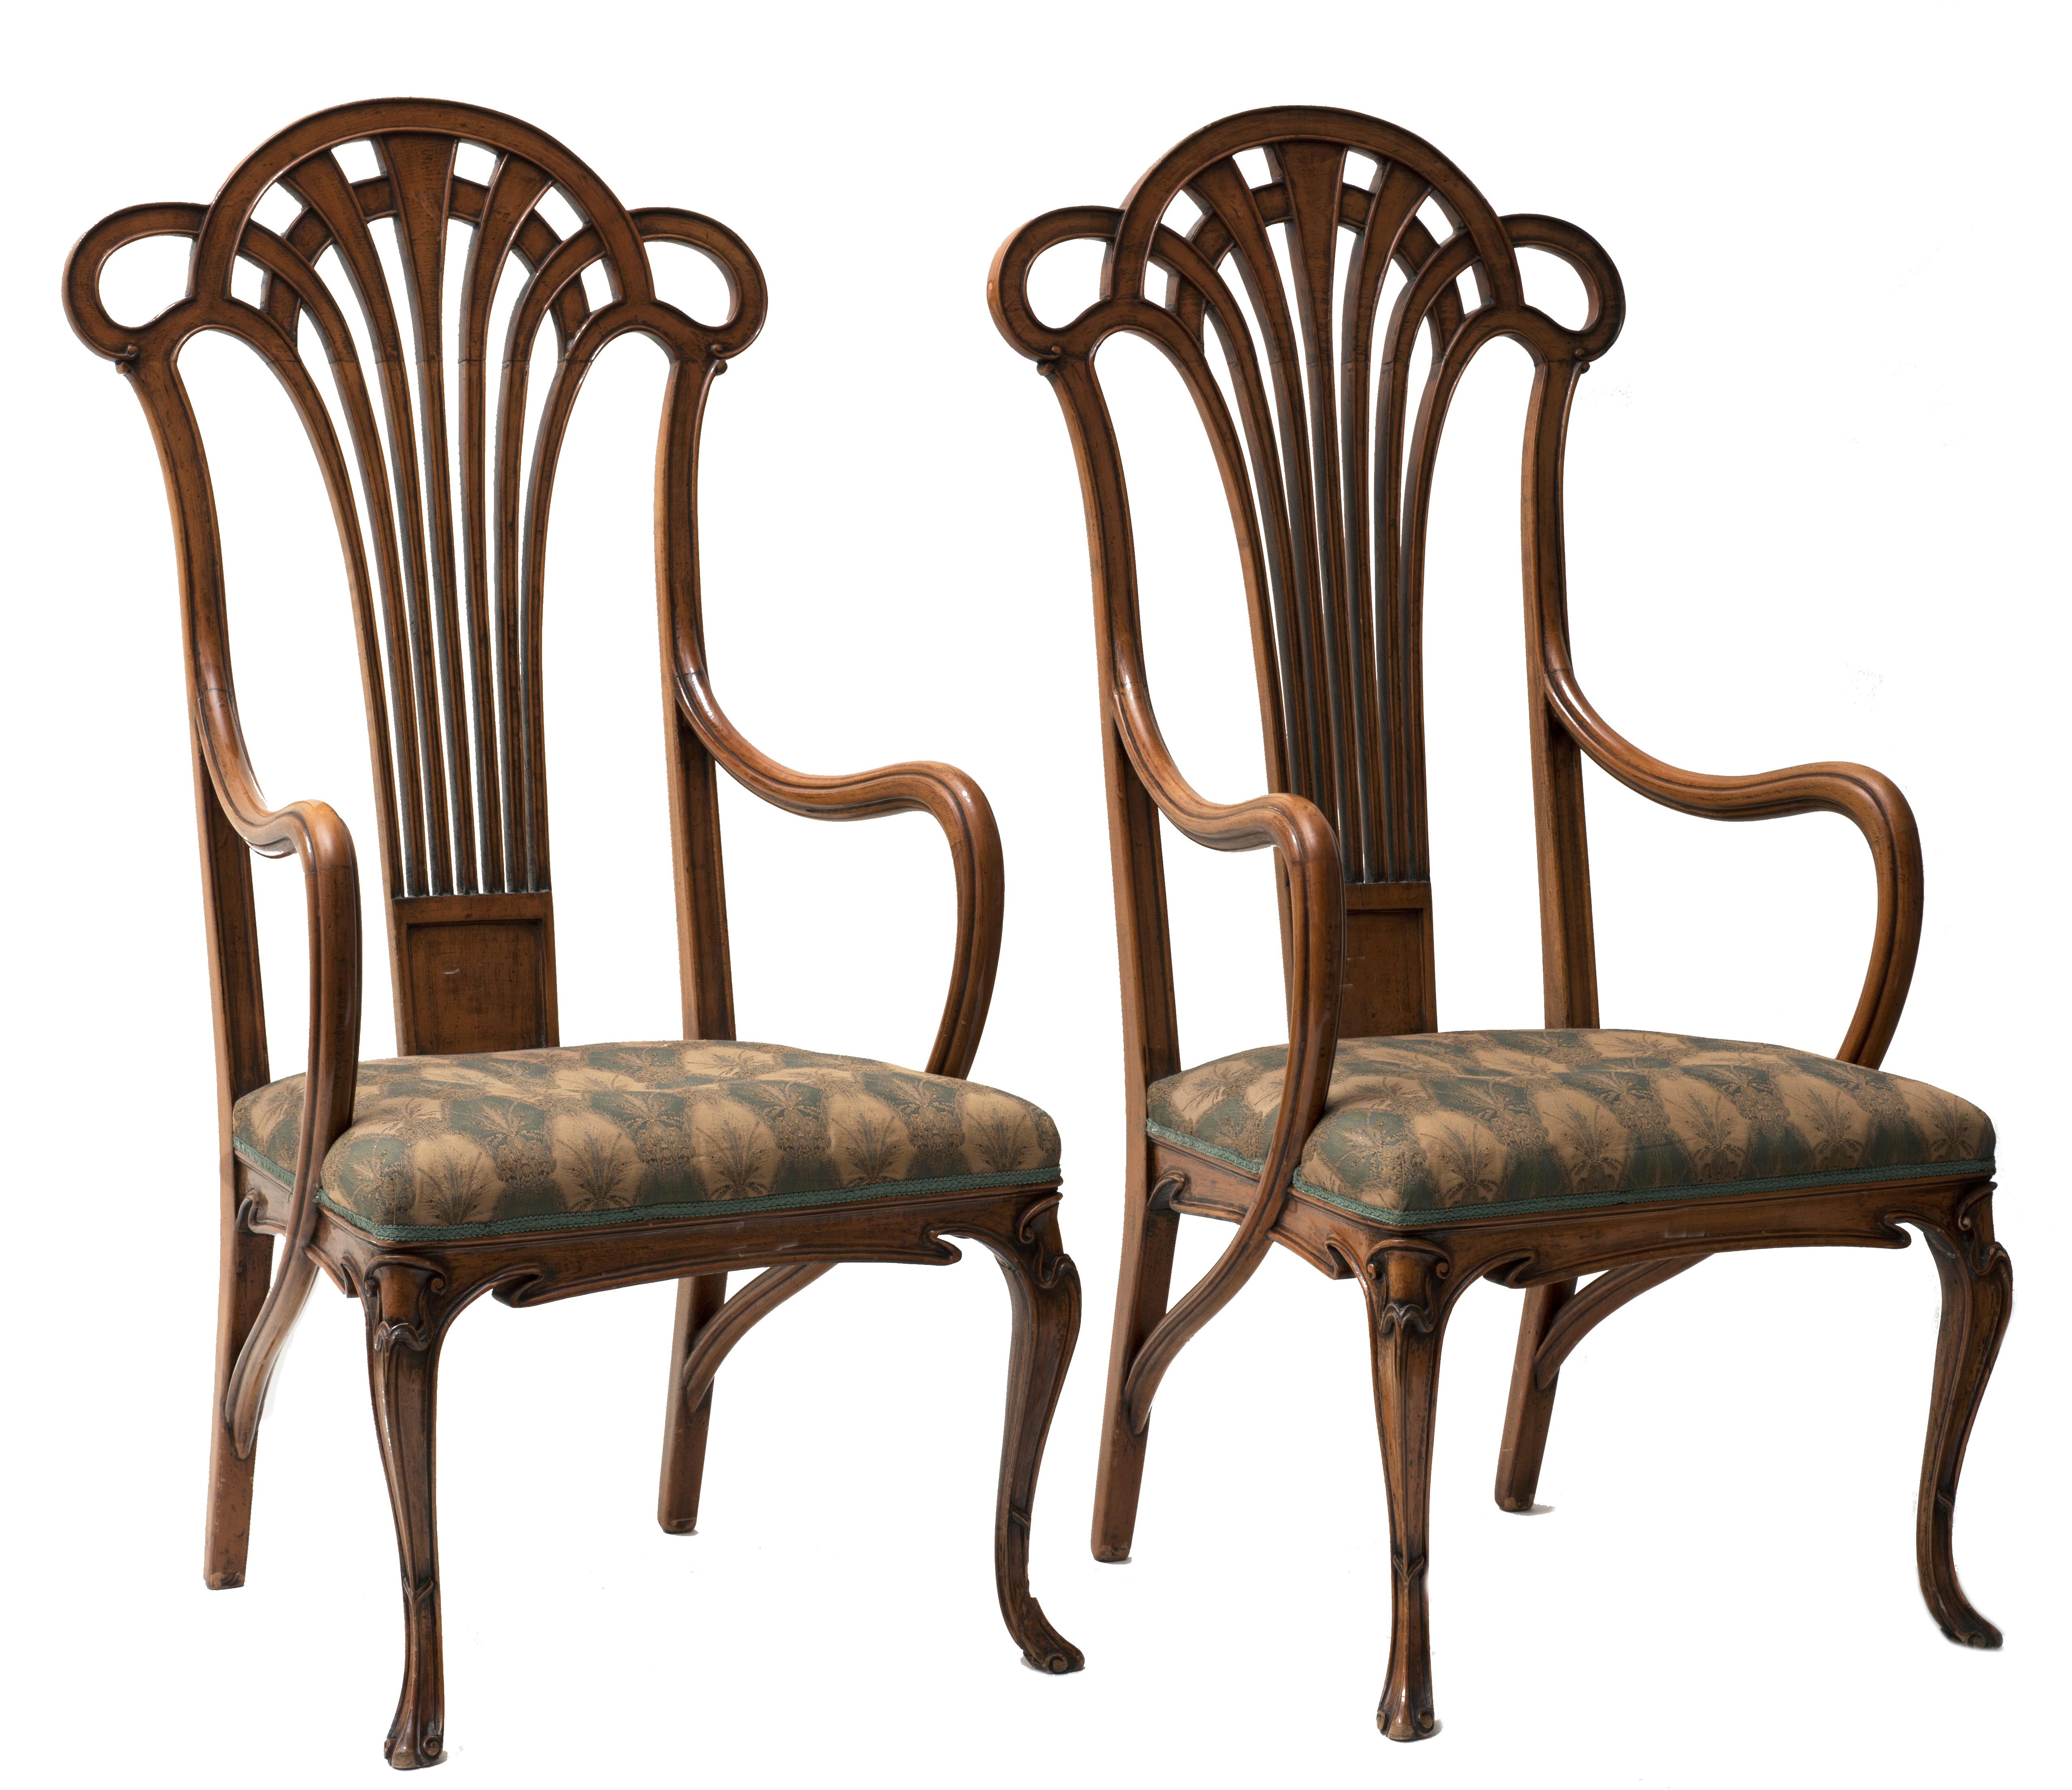 Beautiful pair of liberty armchairs in hickory, curved arms and front legs, seat dressed in cloth and seatback fan shaped.
France, Art Nouveau period.
Very good overall conditions, only minor flaws.

This object is shipped from Italy. Under